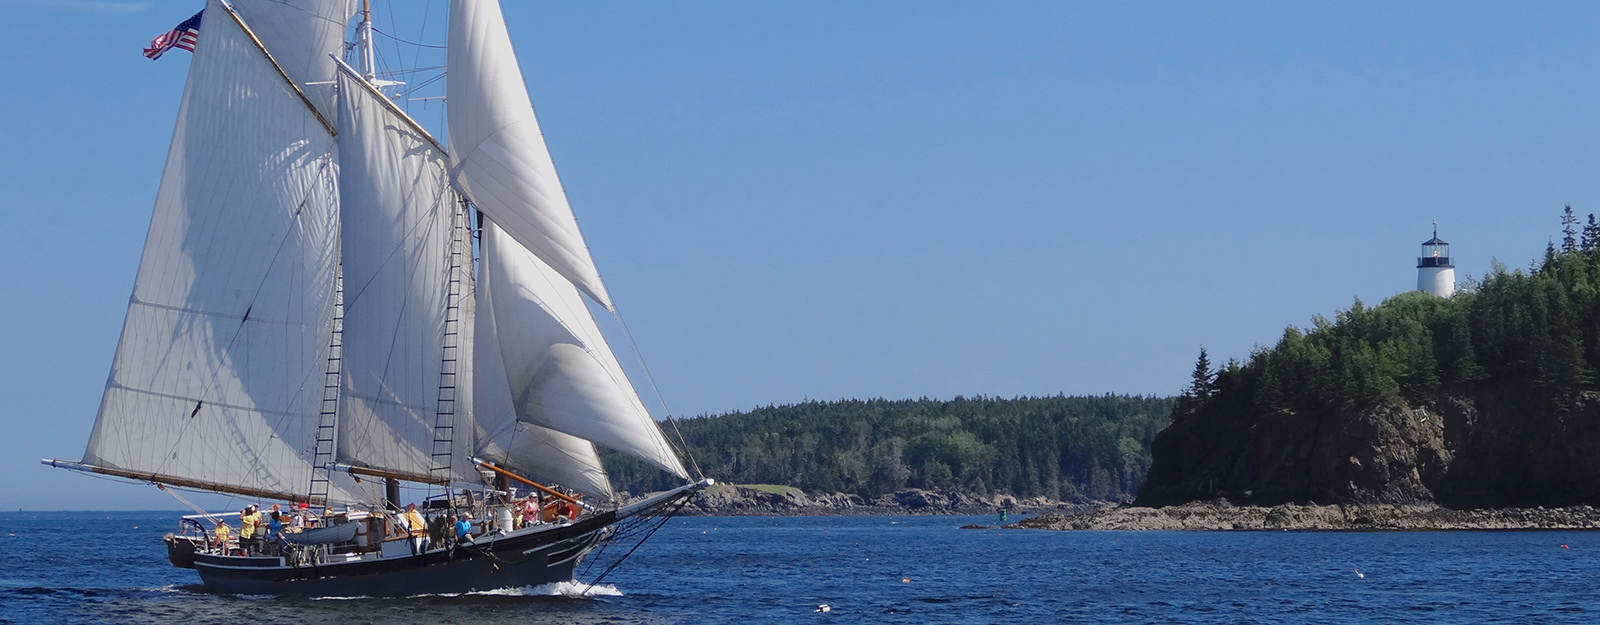 windjammer cruises out of camden maine